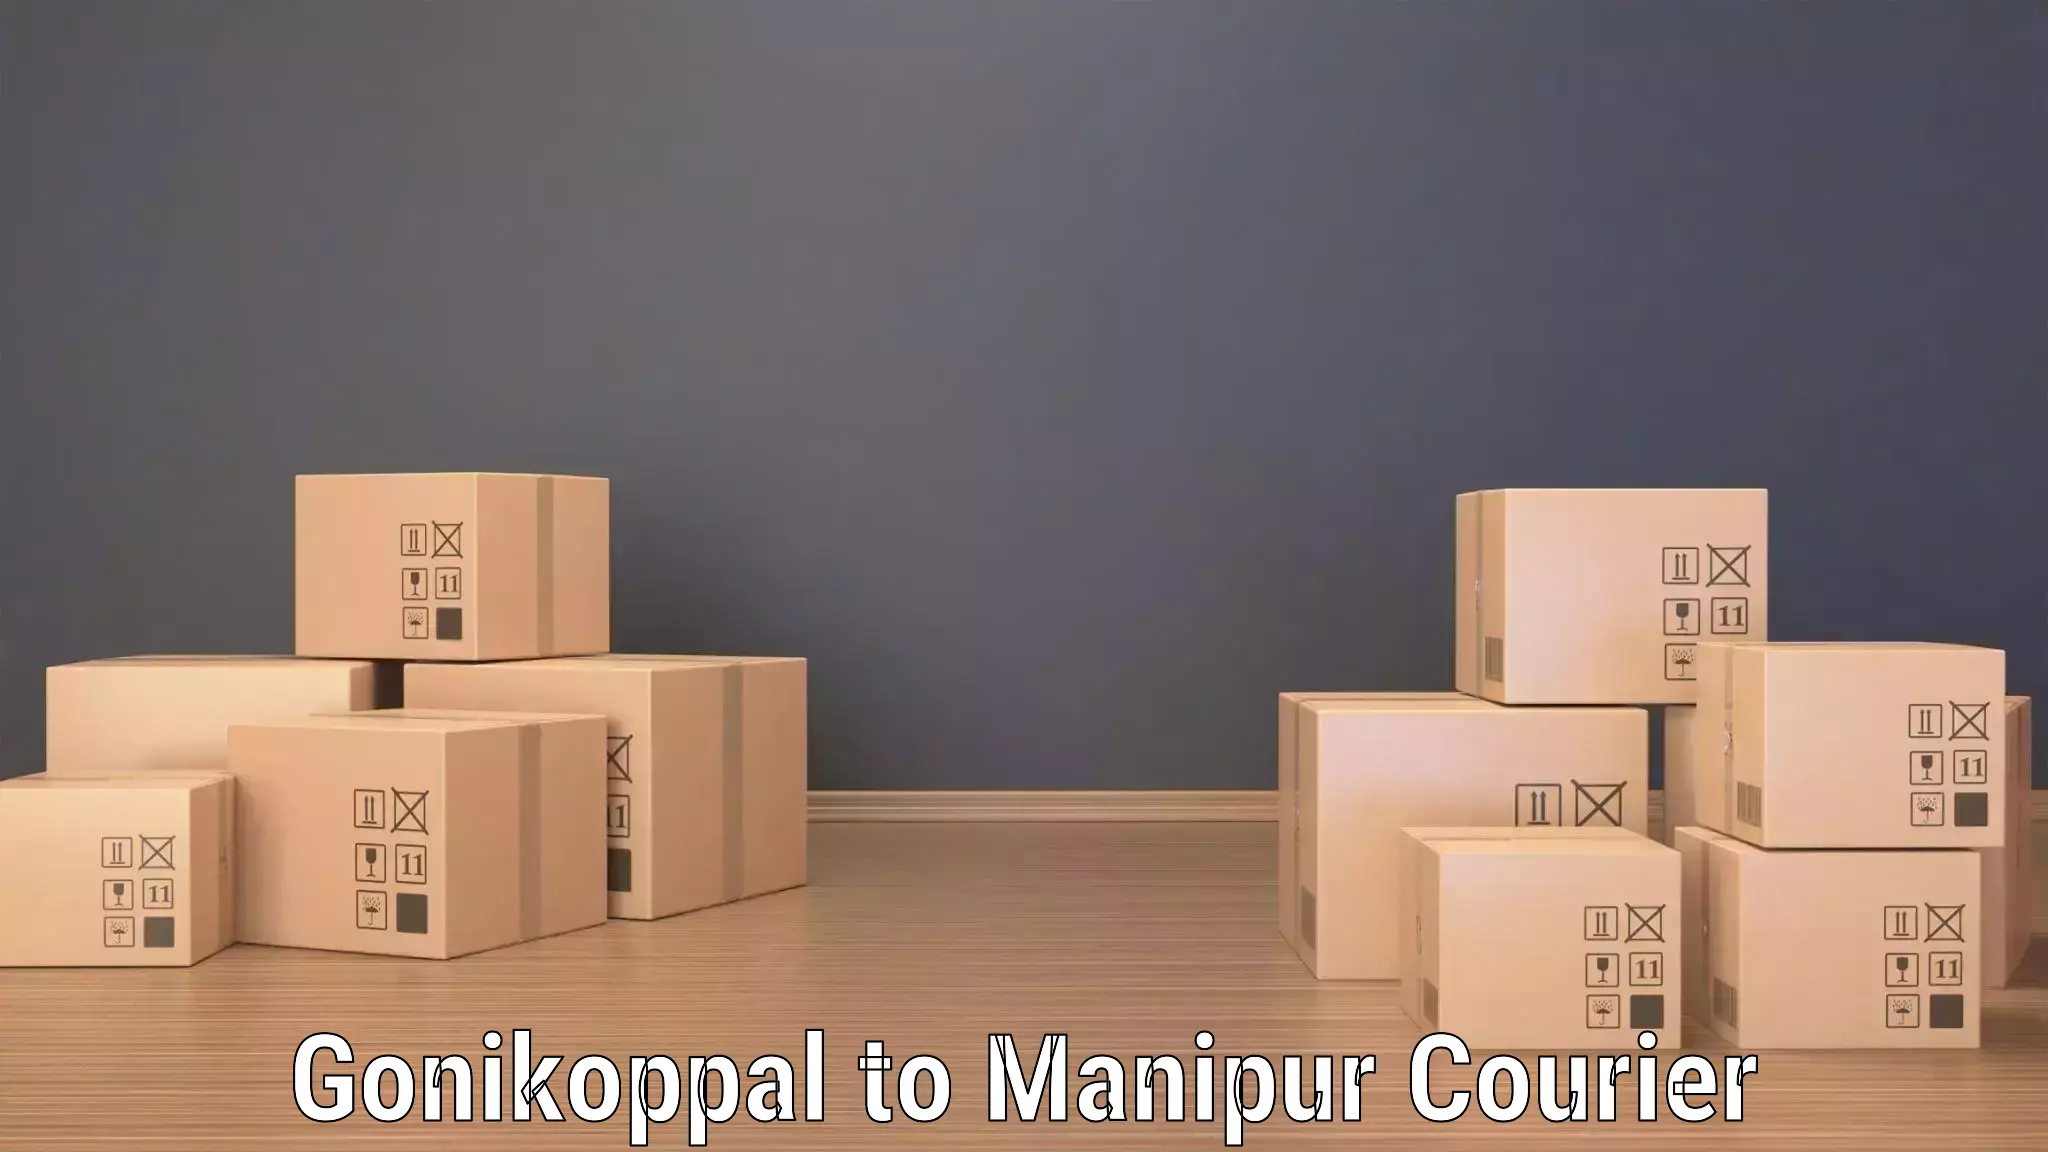 Enhanced tracking features in Gonikoppal to Manipur